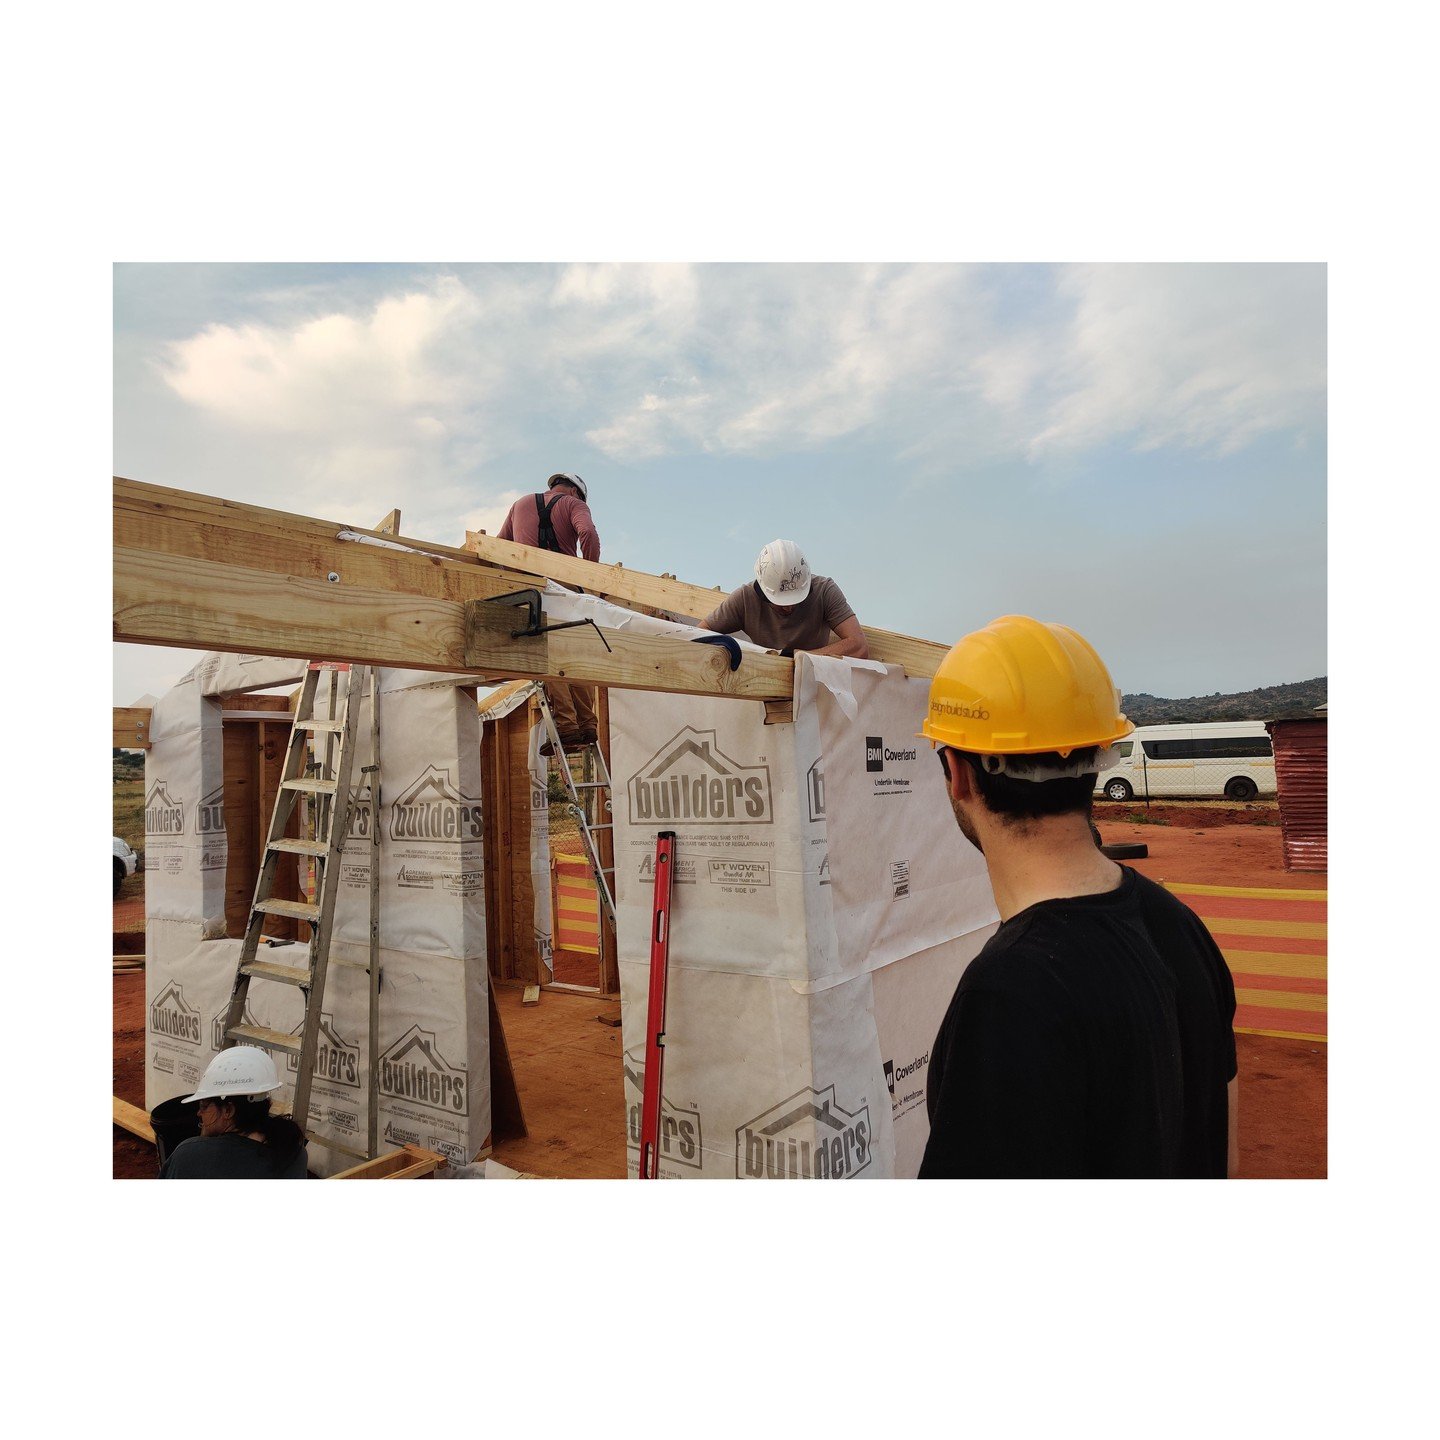 Thread have been tutoring with the Design/Build Studio at the University of Nottingham this academic year. Tom took the opportunity to join the build phase, returning last week from South Africa after helping to construct the Matshela Creche with stu